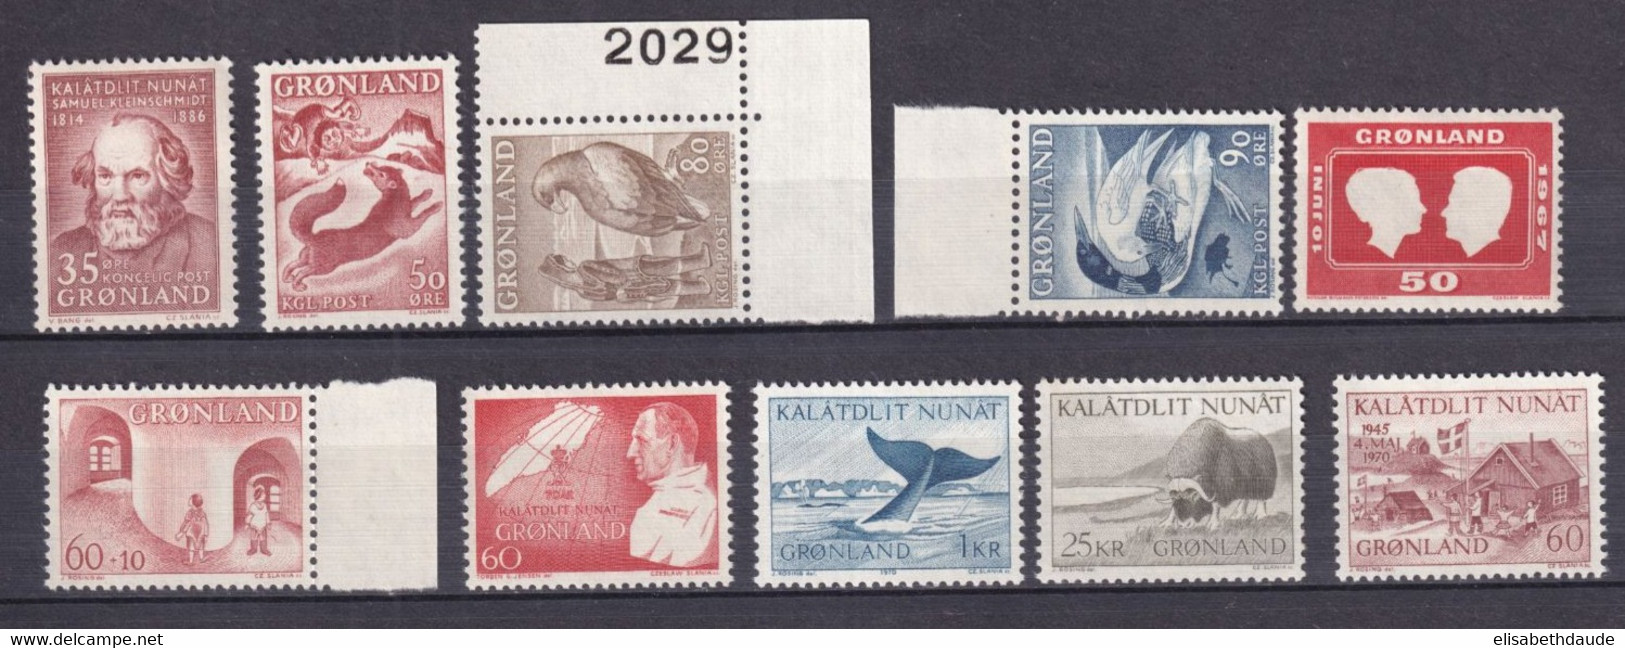 GROENLAND - ANNEES COMPLETES 1964 à 1970 - YVERT N°55/64 ** MNH - COTE = 32 EUR - - Full Years